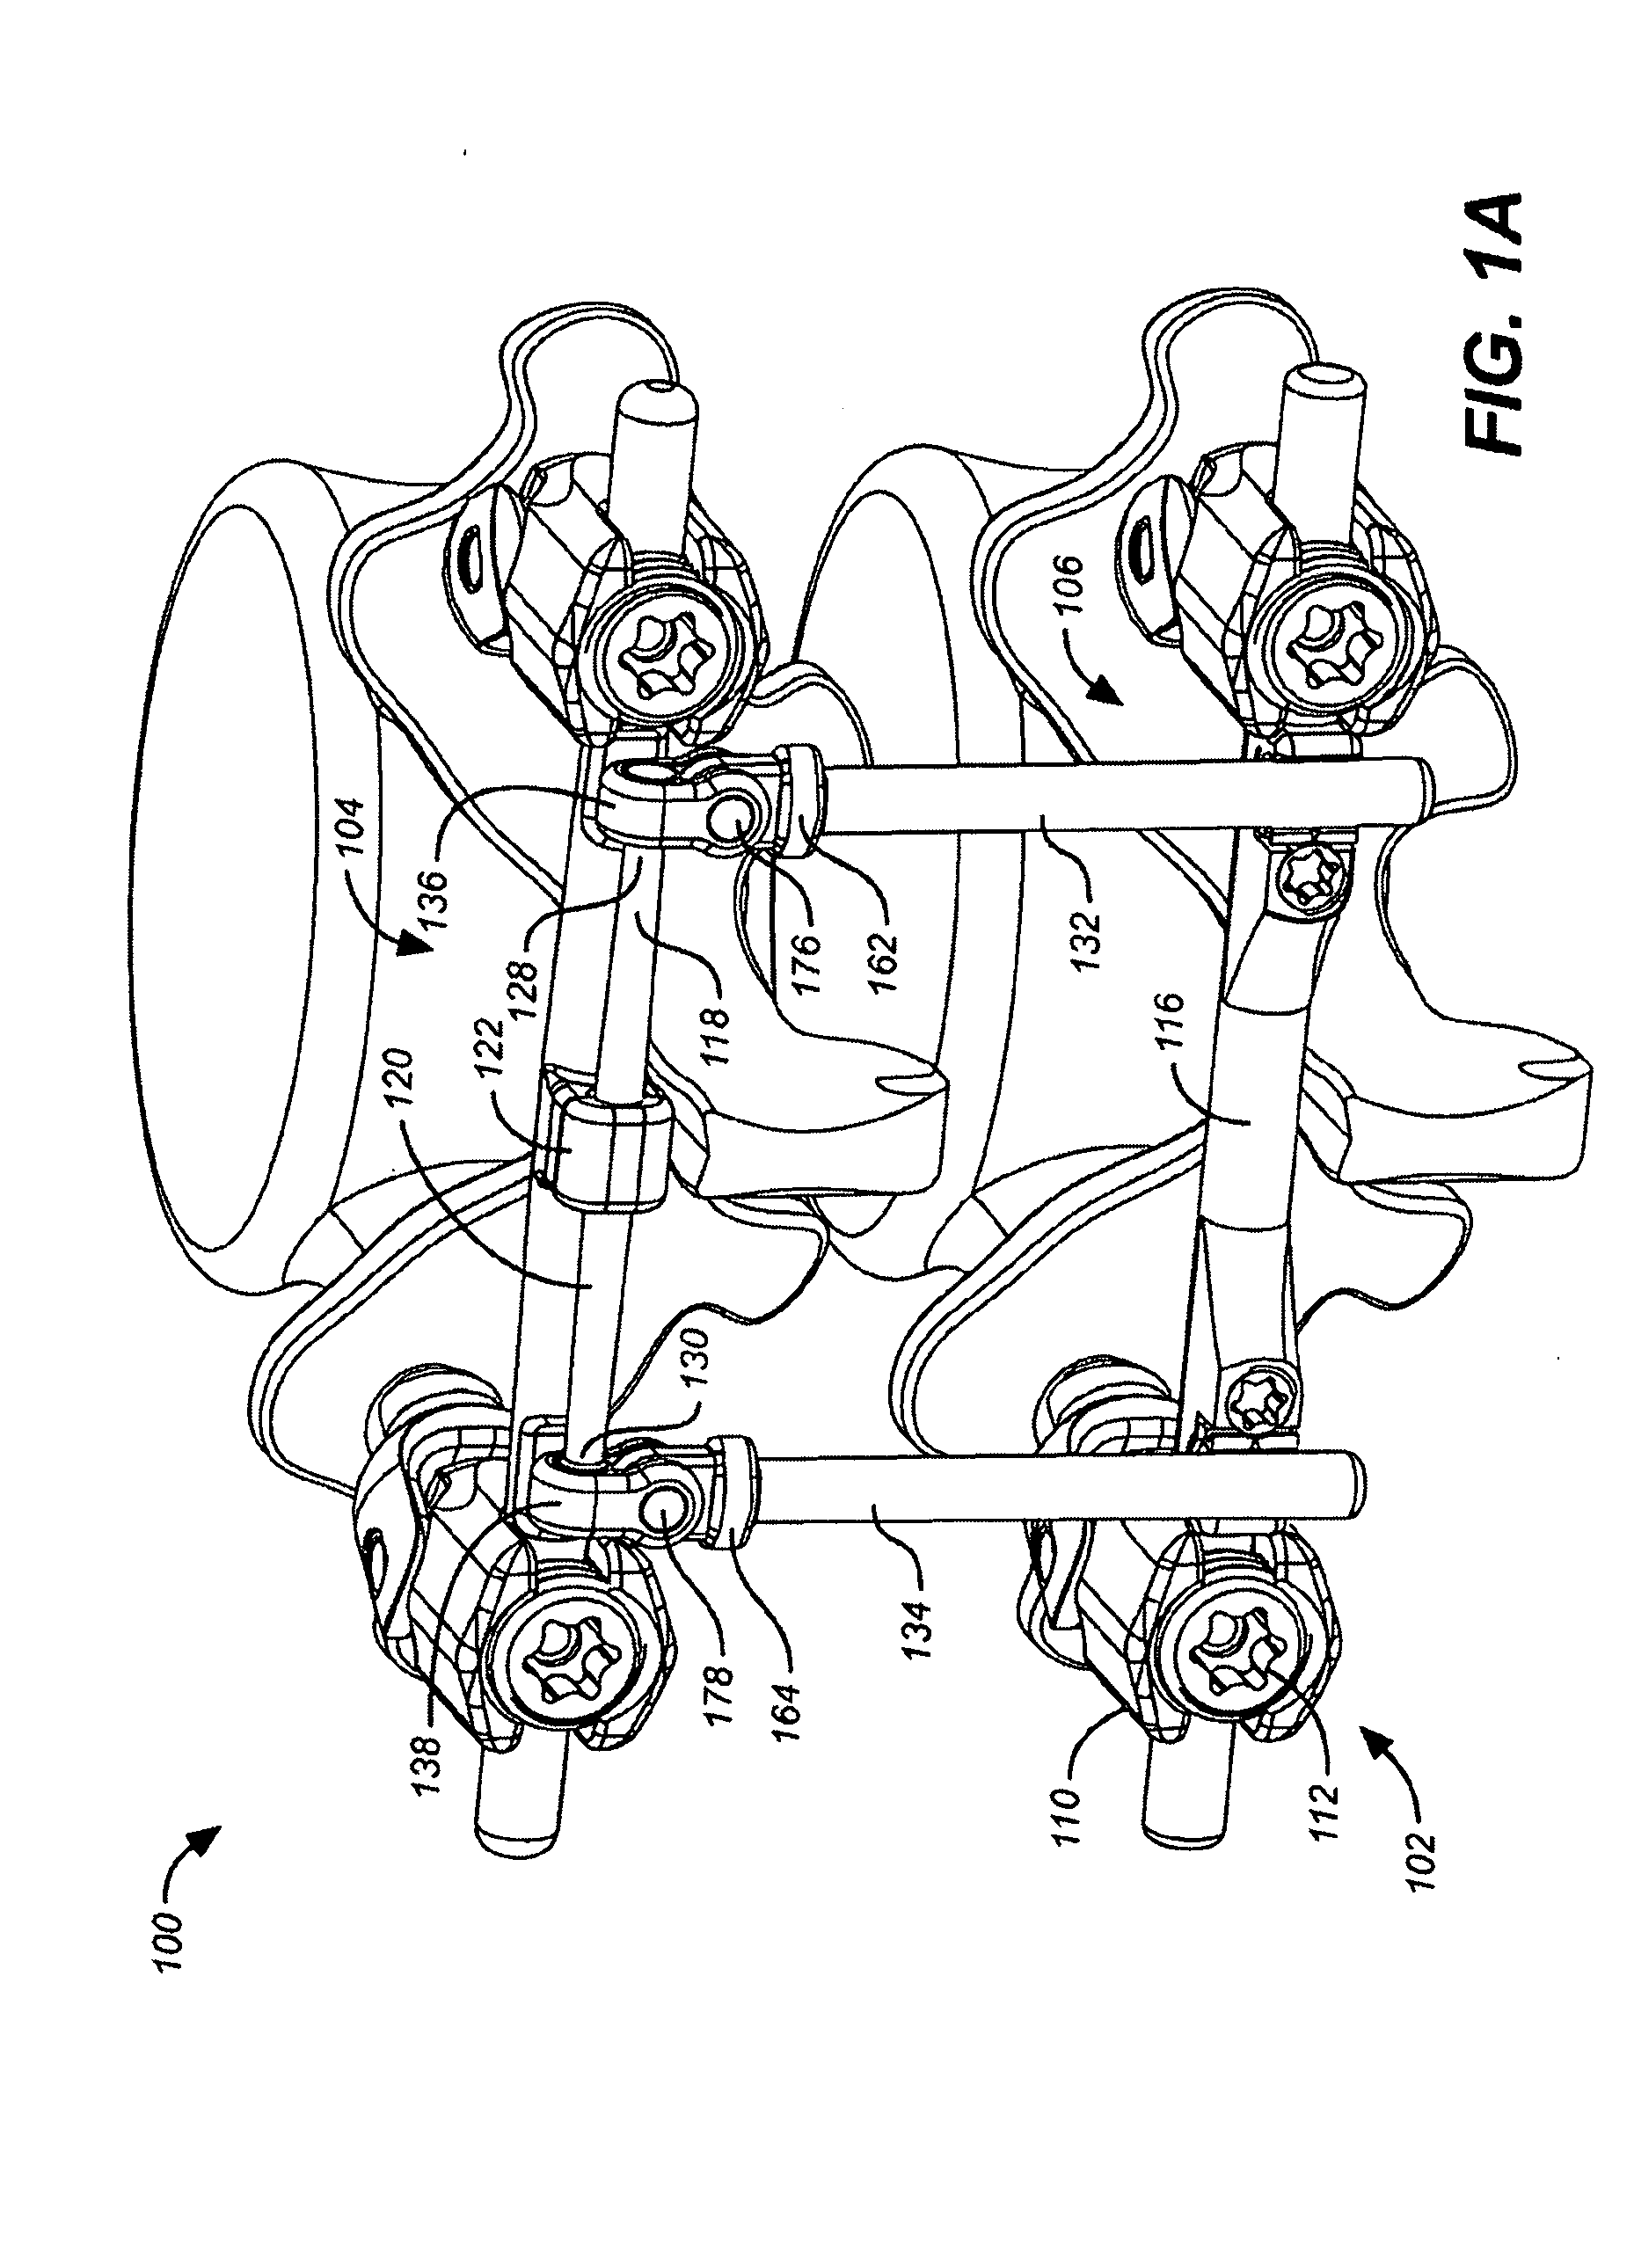 Deflection rod system for a dynamic stabilization and motion preservation spinal implantation system and method